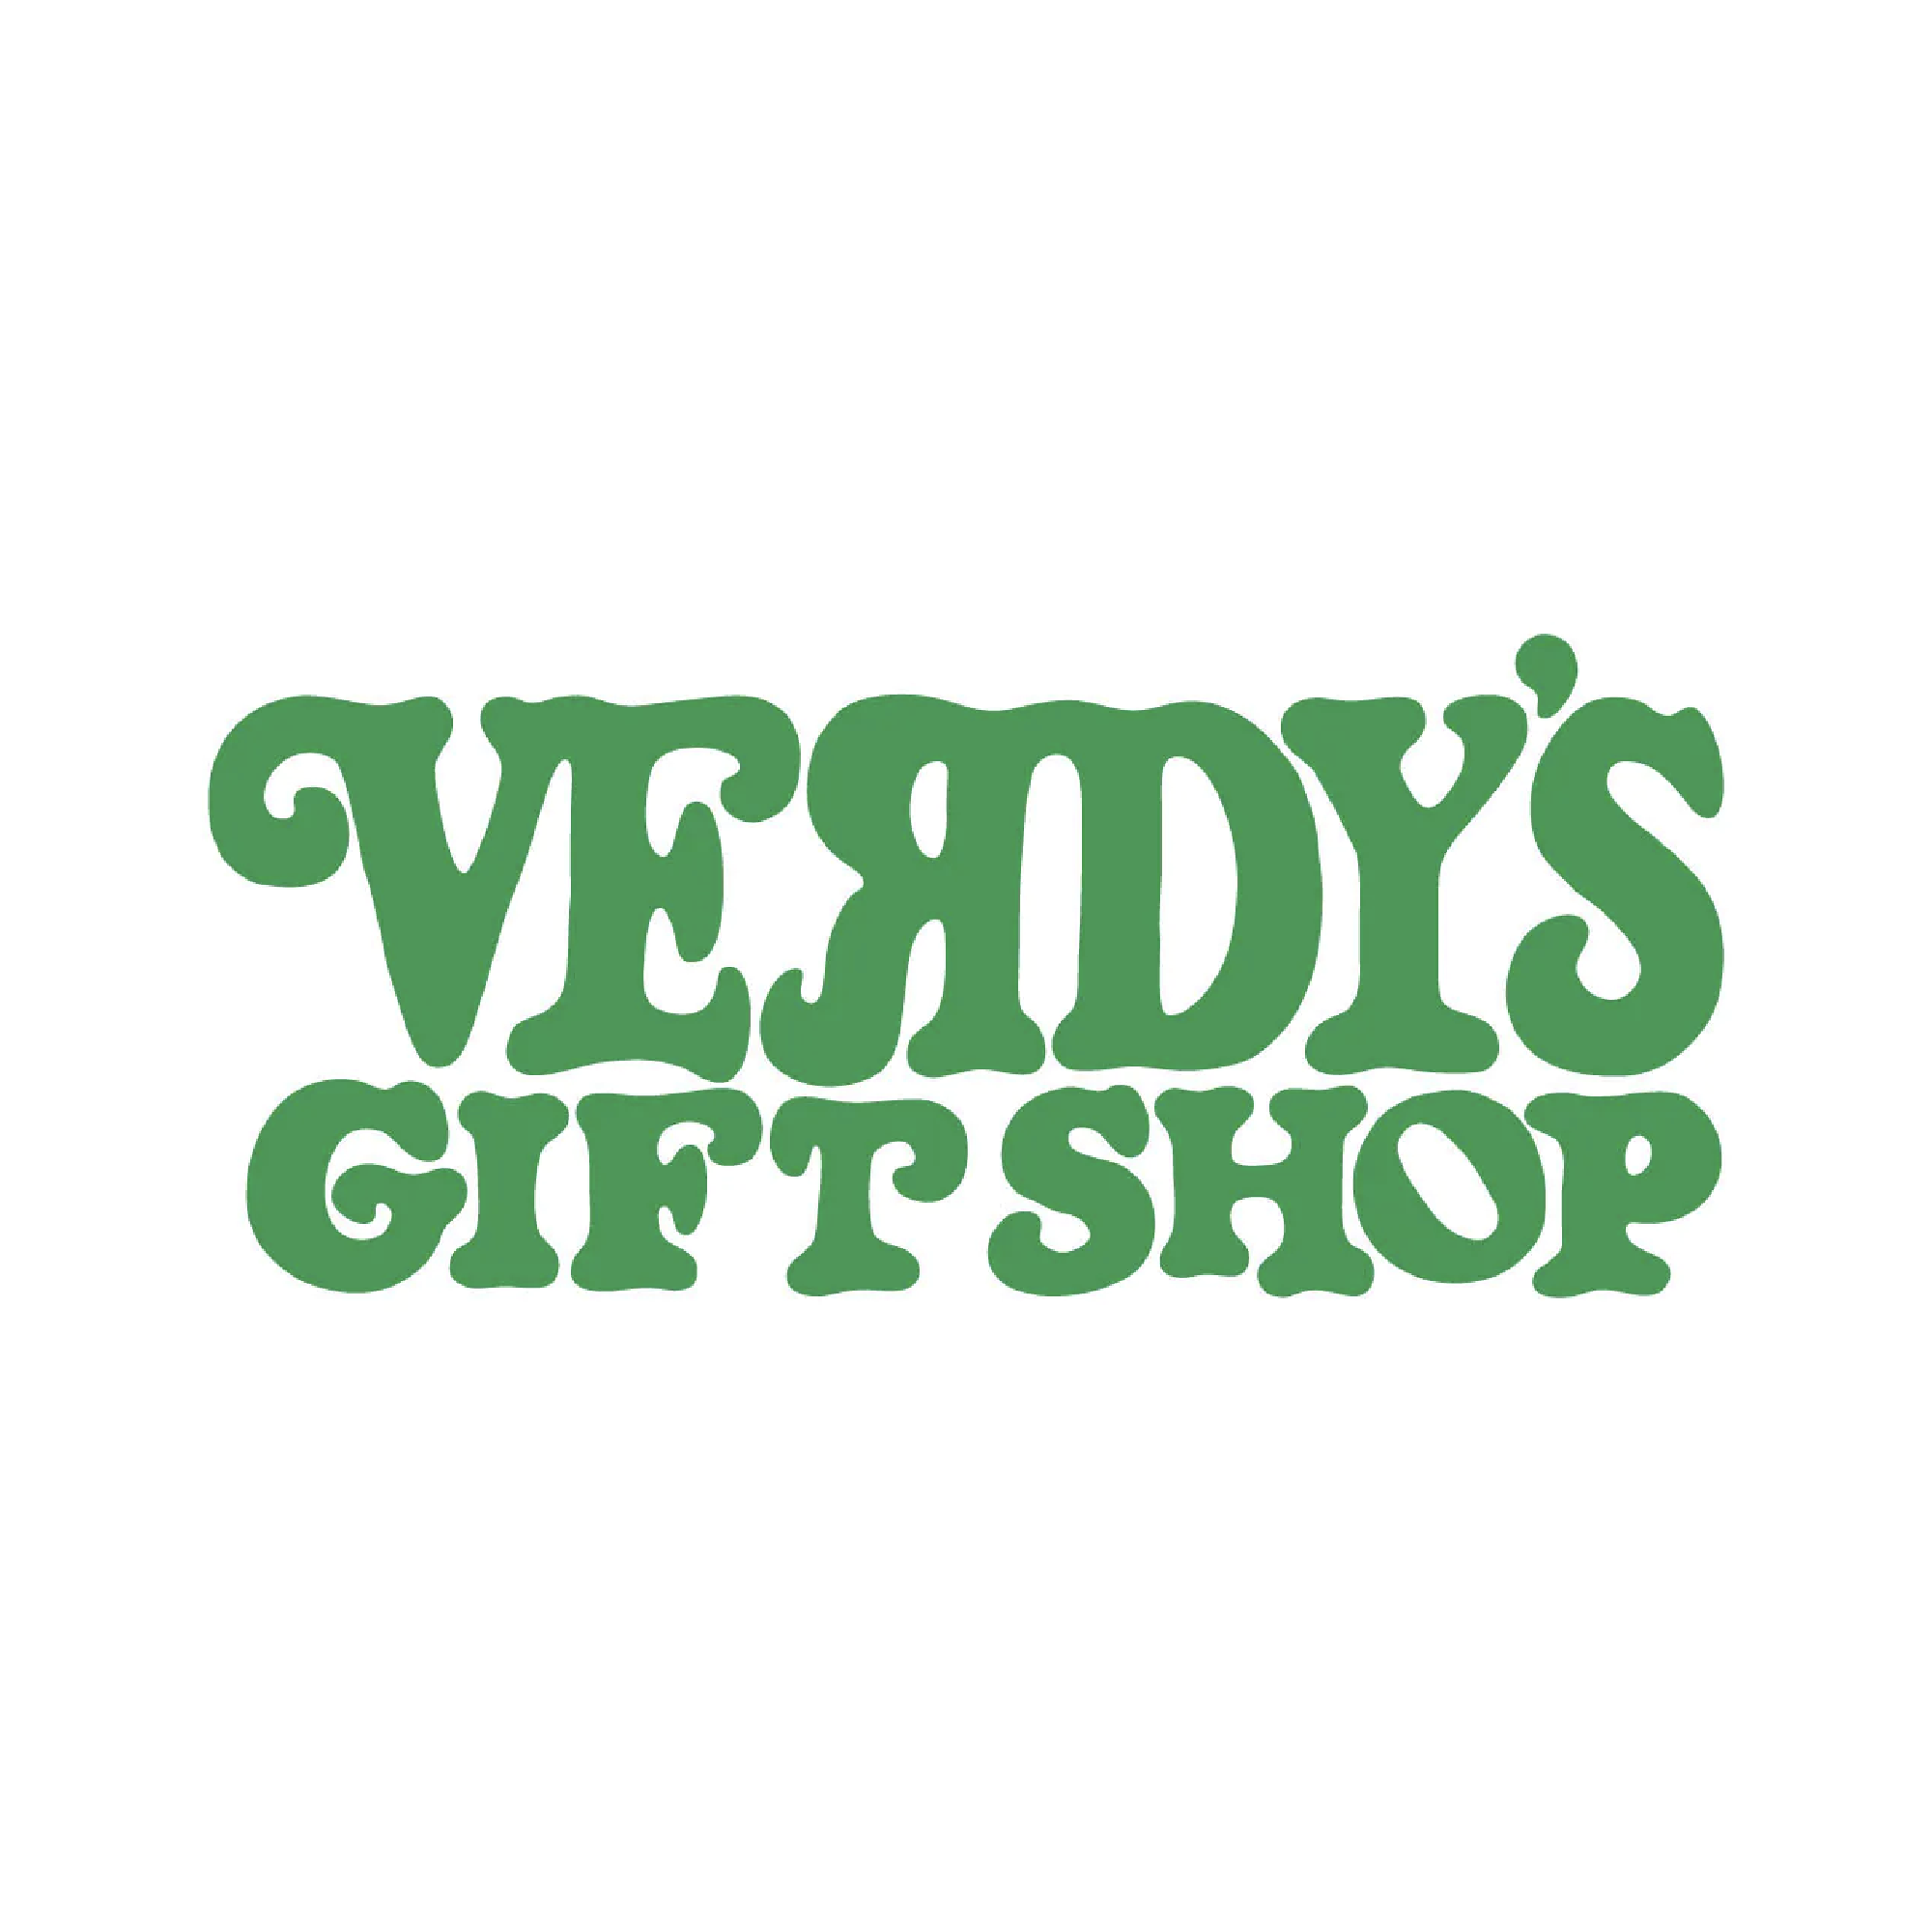 VERDY'S GIFT SHOP